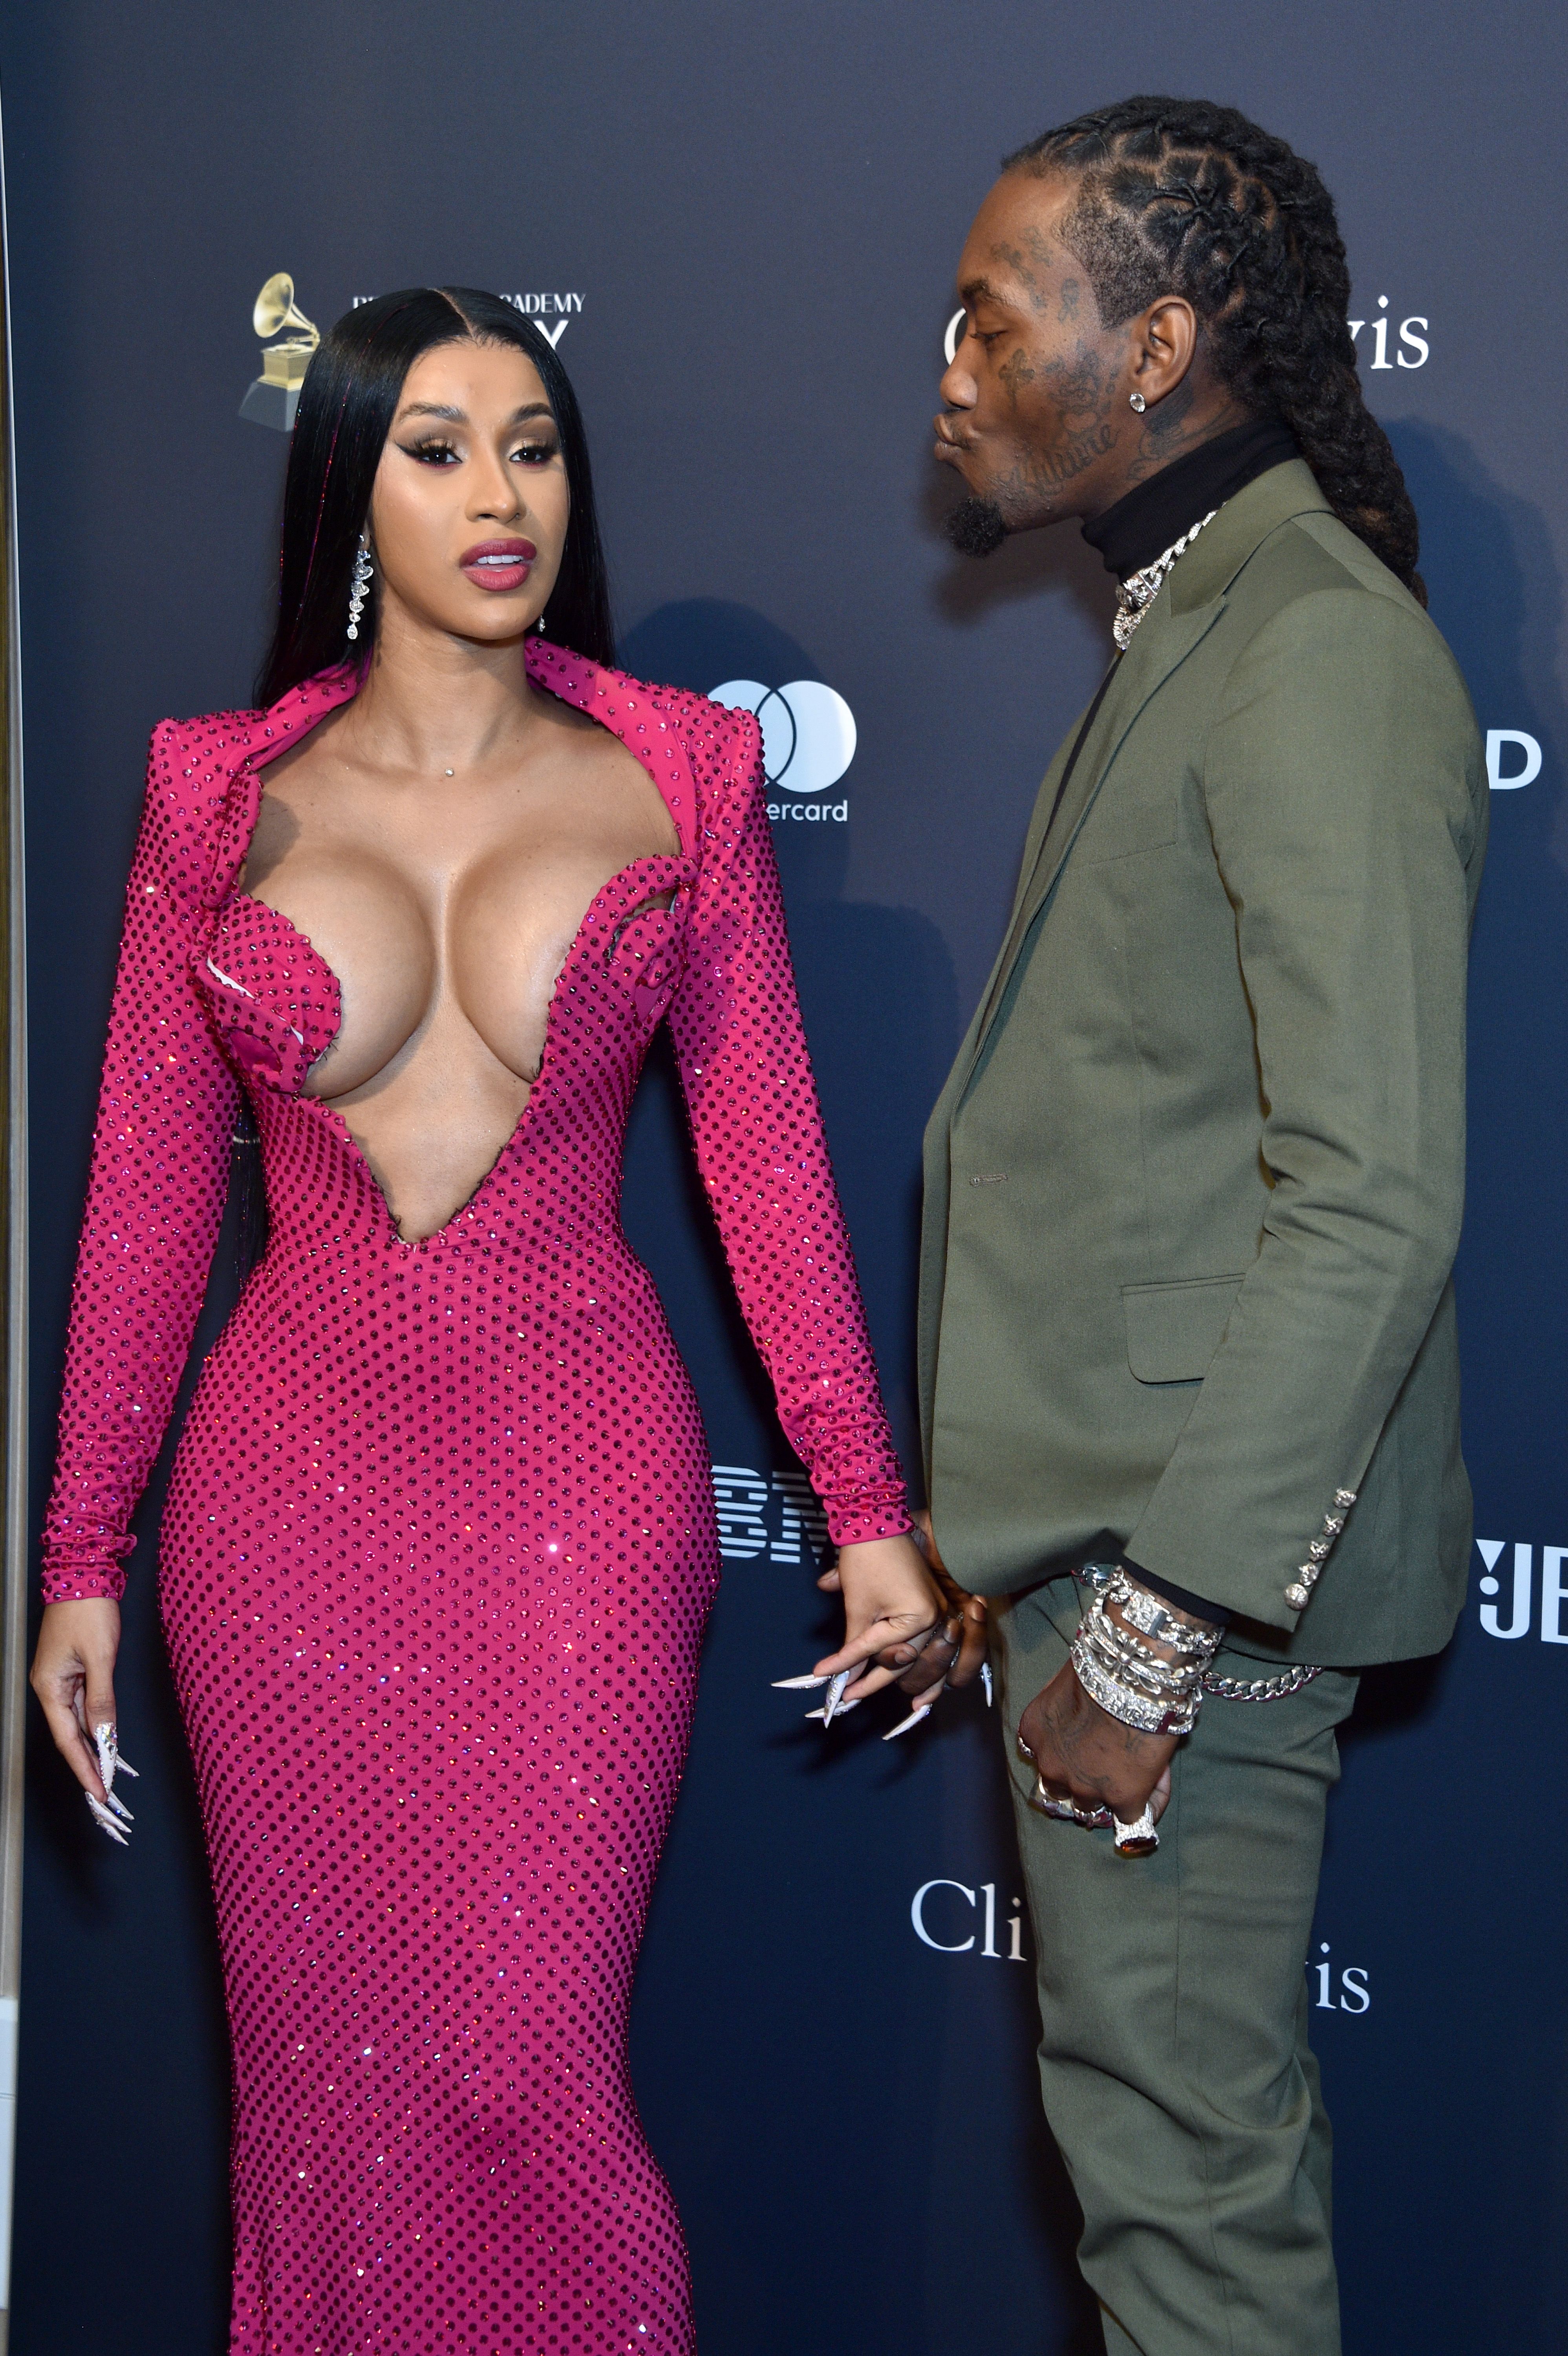 Cardi B and Offset disagree about how to dress their son